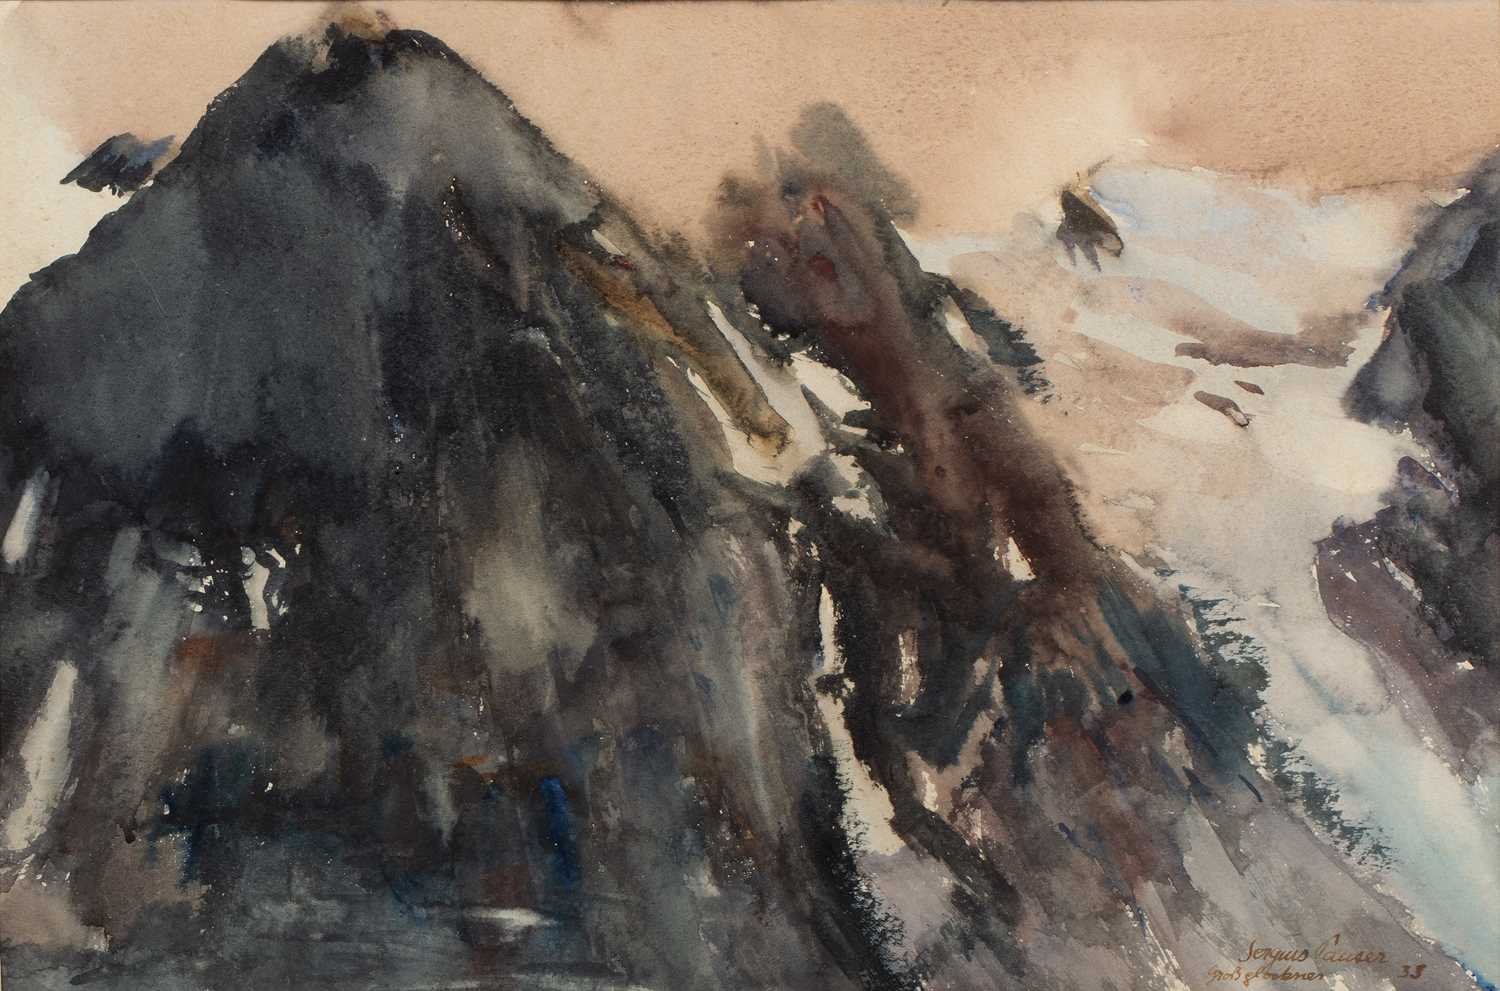 Sergius Pauser (1896-1970) Grossglockner, 1935 signed, inscribed, and dated (lower right)